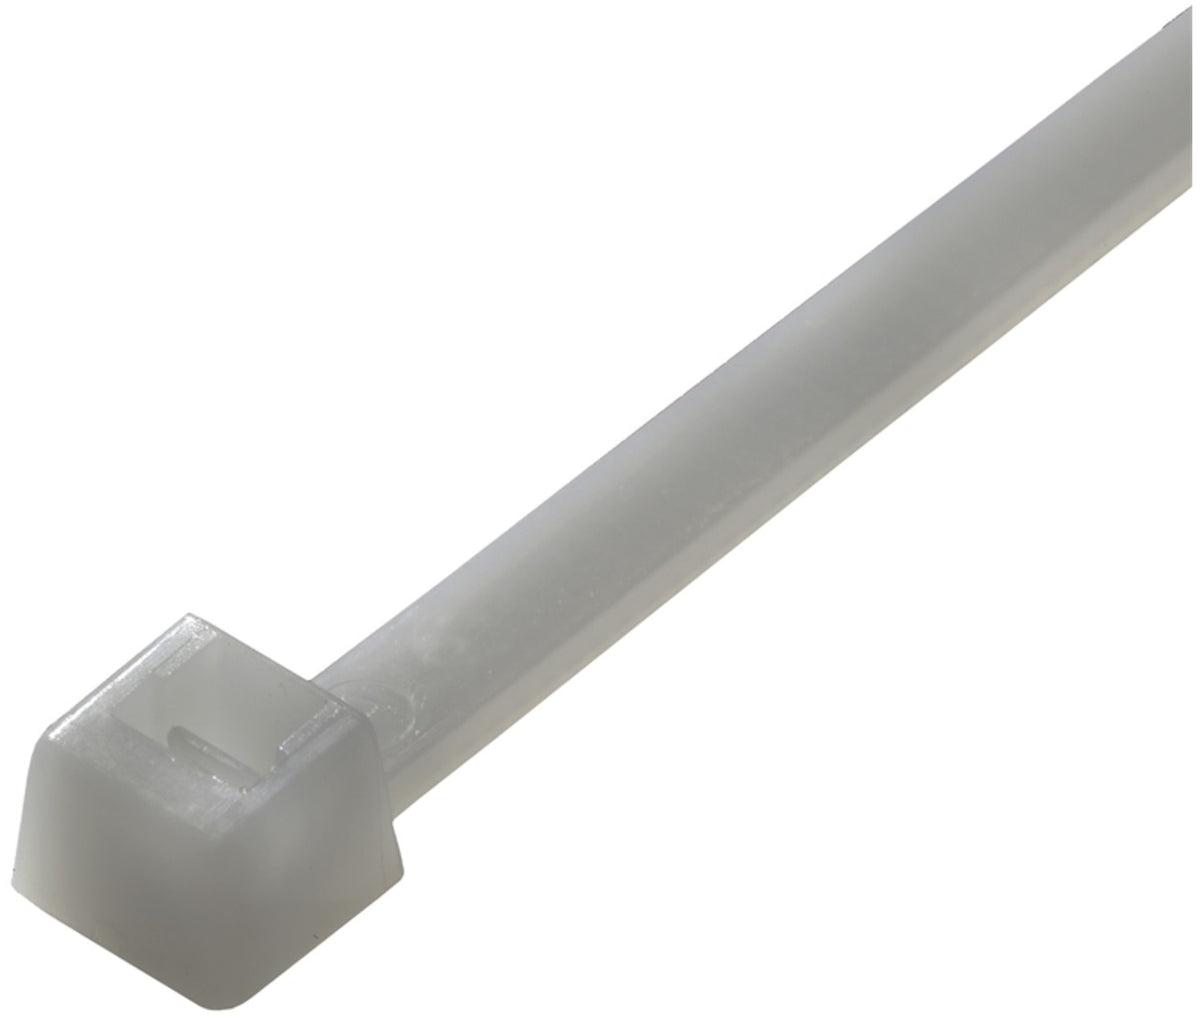 Advanced Cable Ties AL-14-50-9-C Standard Cable Ties, Nylon, Natural White